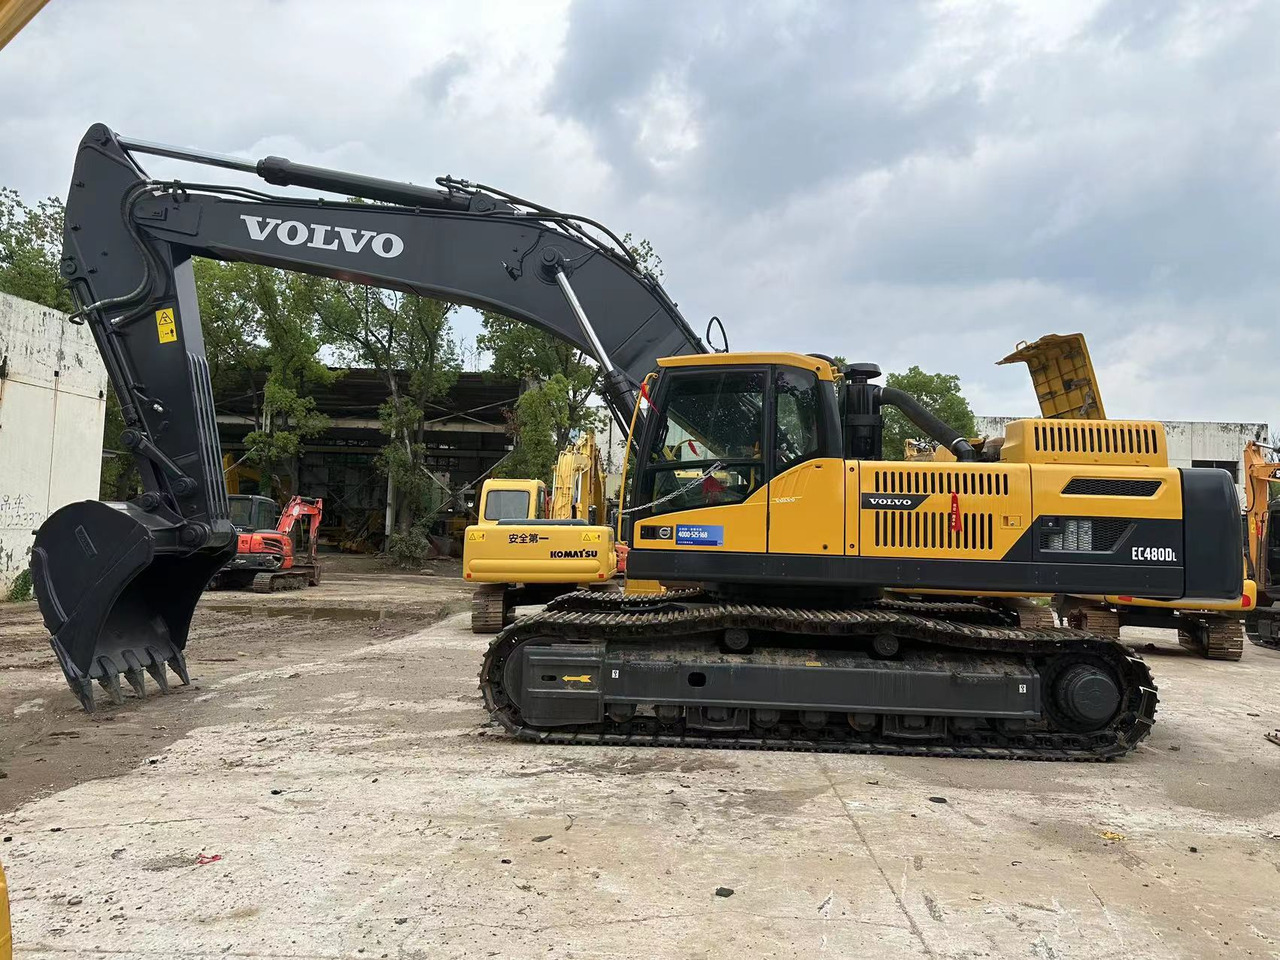 Hot selling original made Used excavator VOLVO EC480DL in stock low price for sale lizing Hot selling original made Used excavator VOLVO EC480DL in stock low price for sale: slika 2